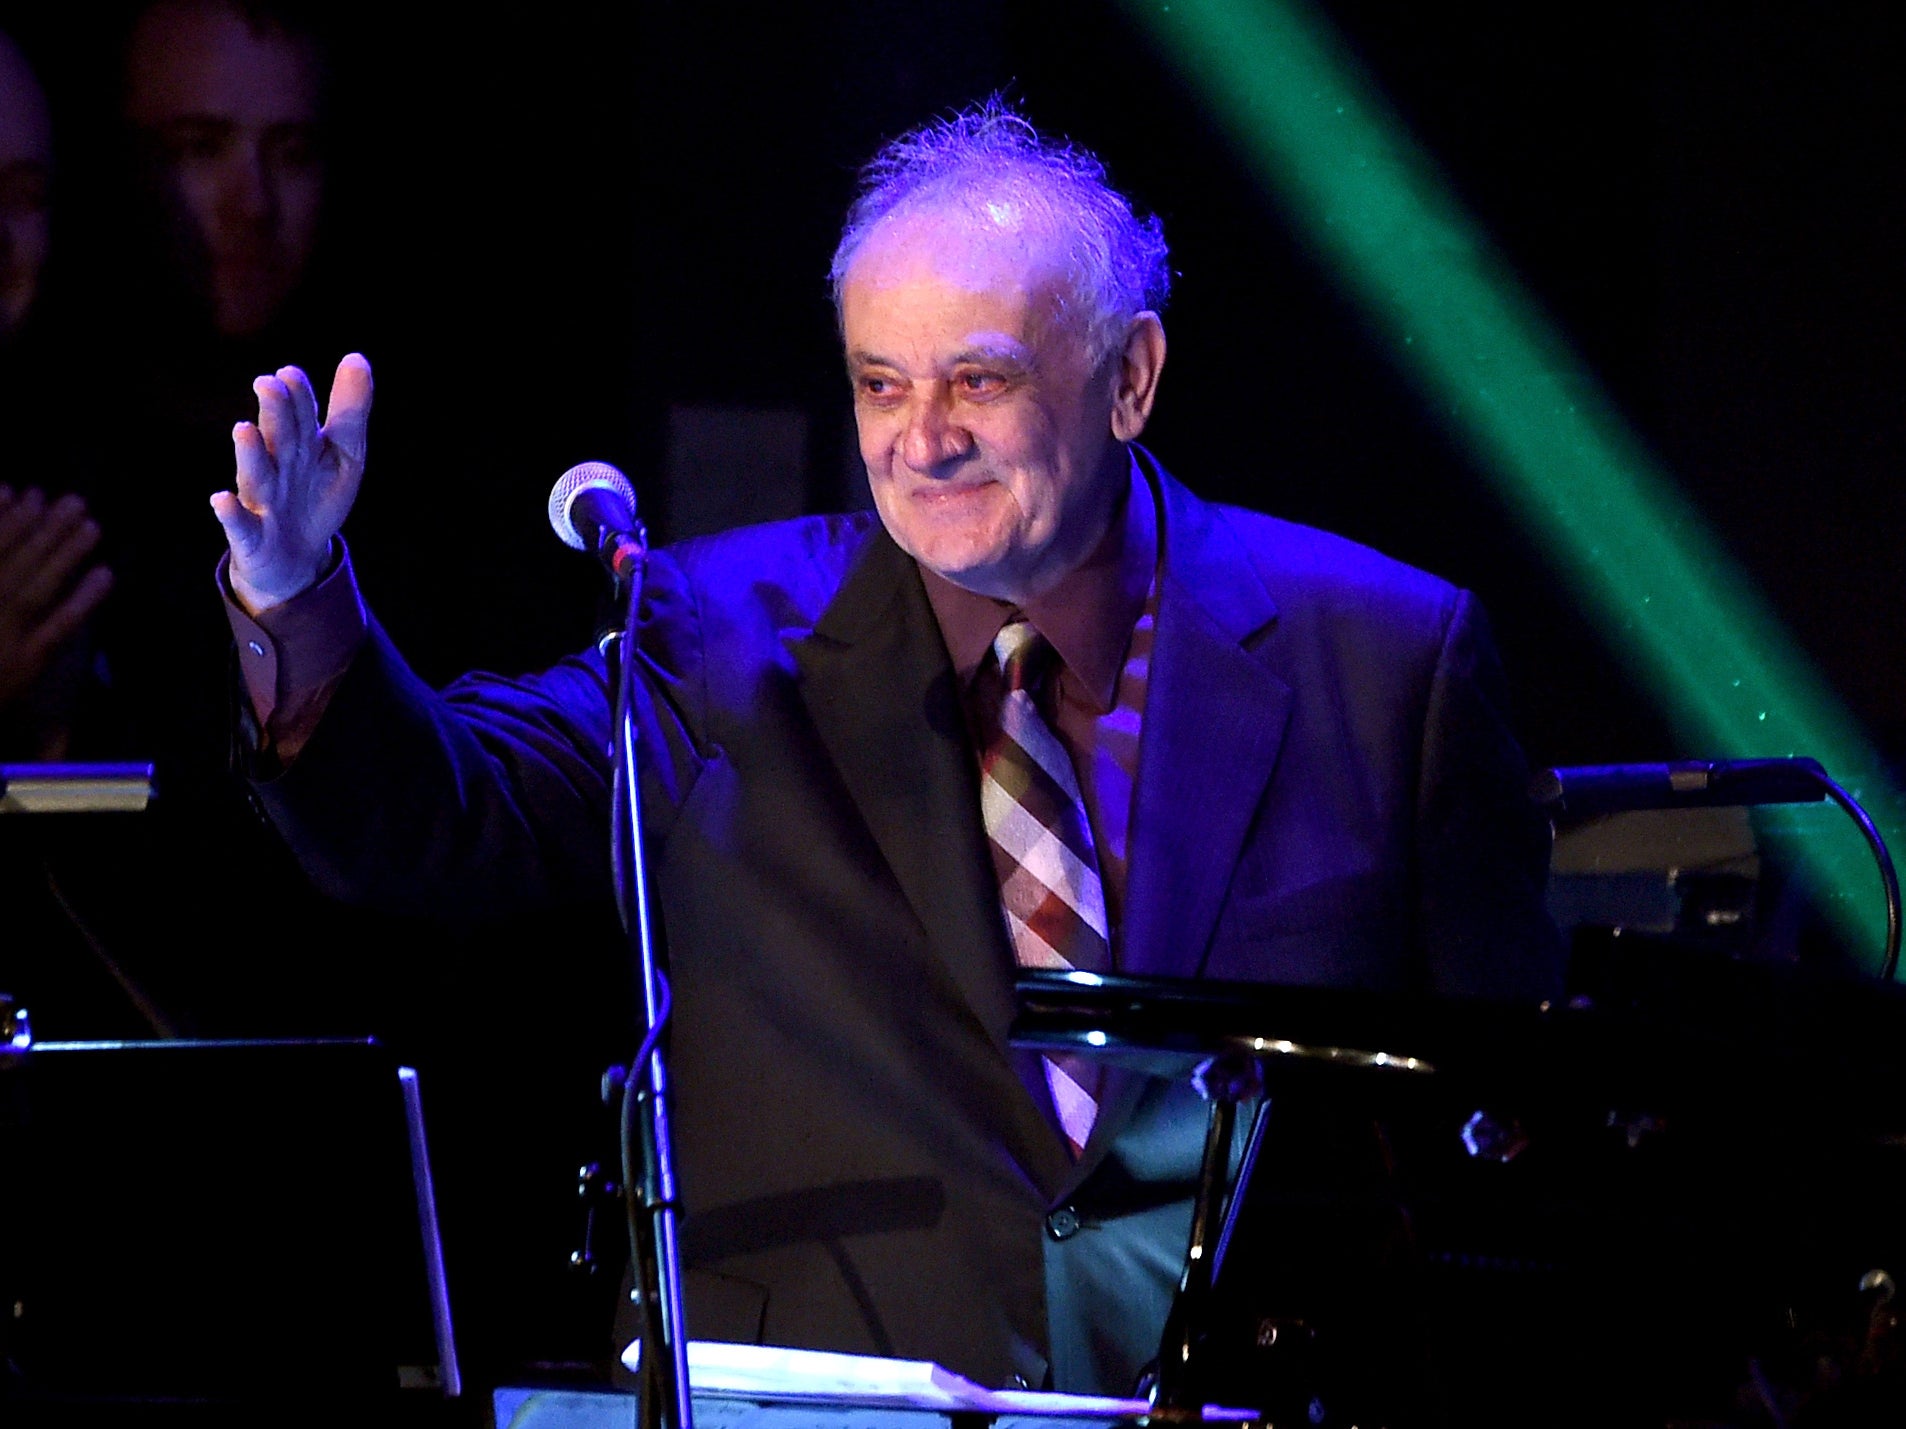 Badalamenti onstage during ‘The Music of David Lynch’ concert in LA in 2015